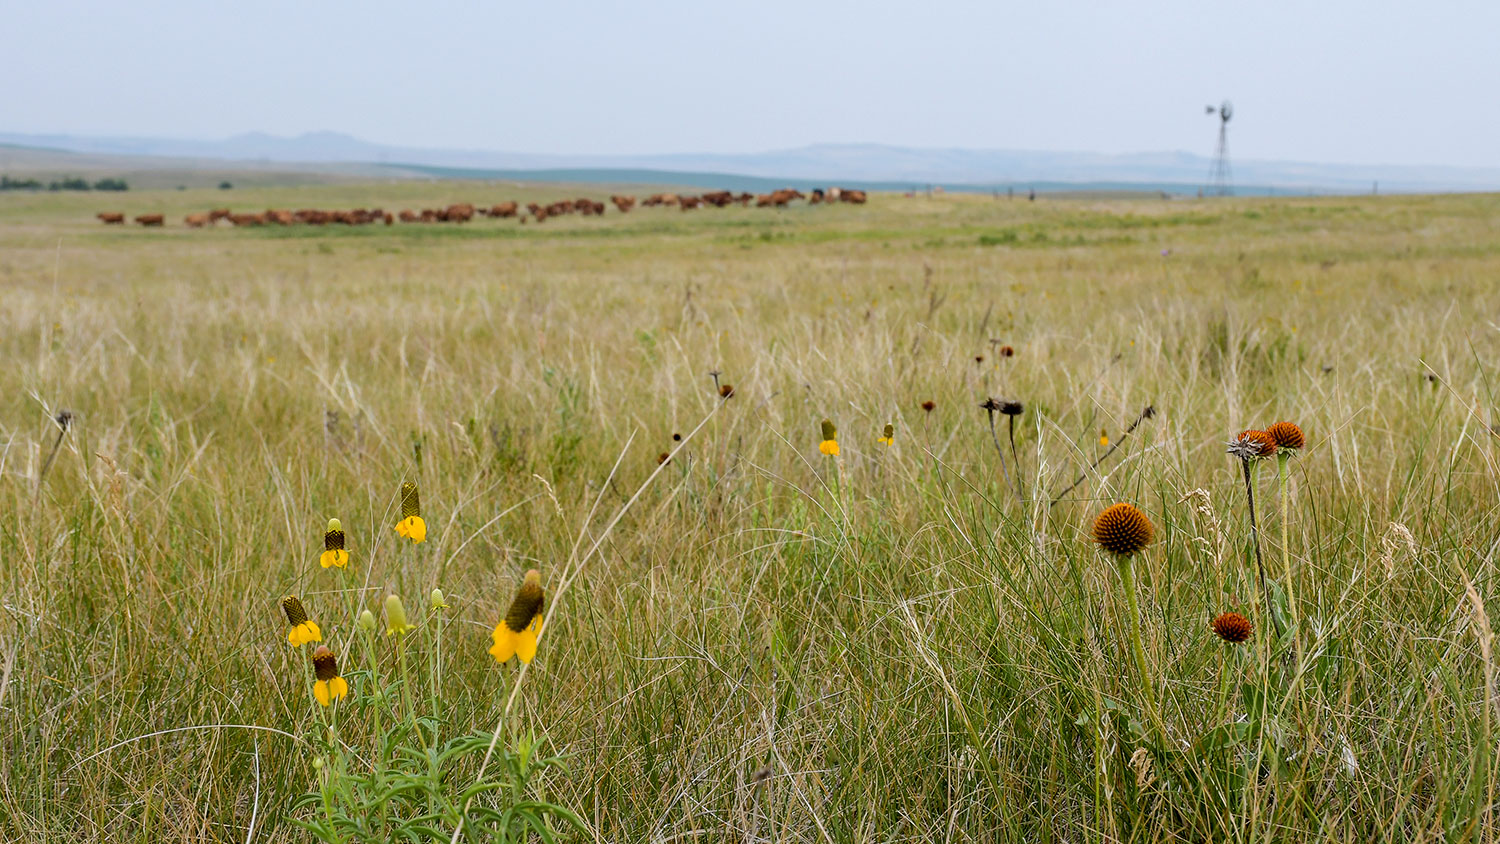 Prairie grass and flowers with cattle in background